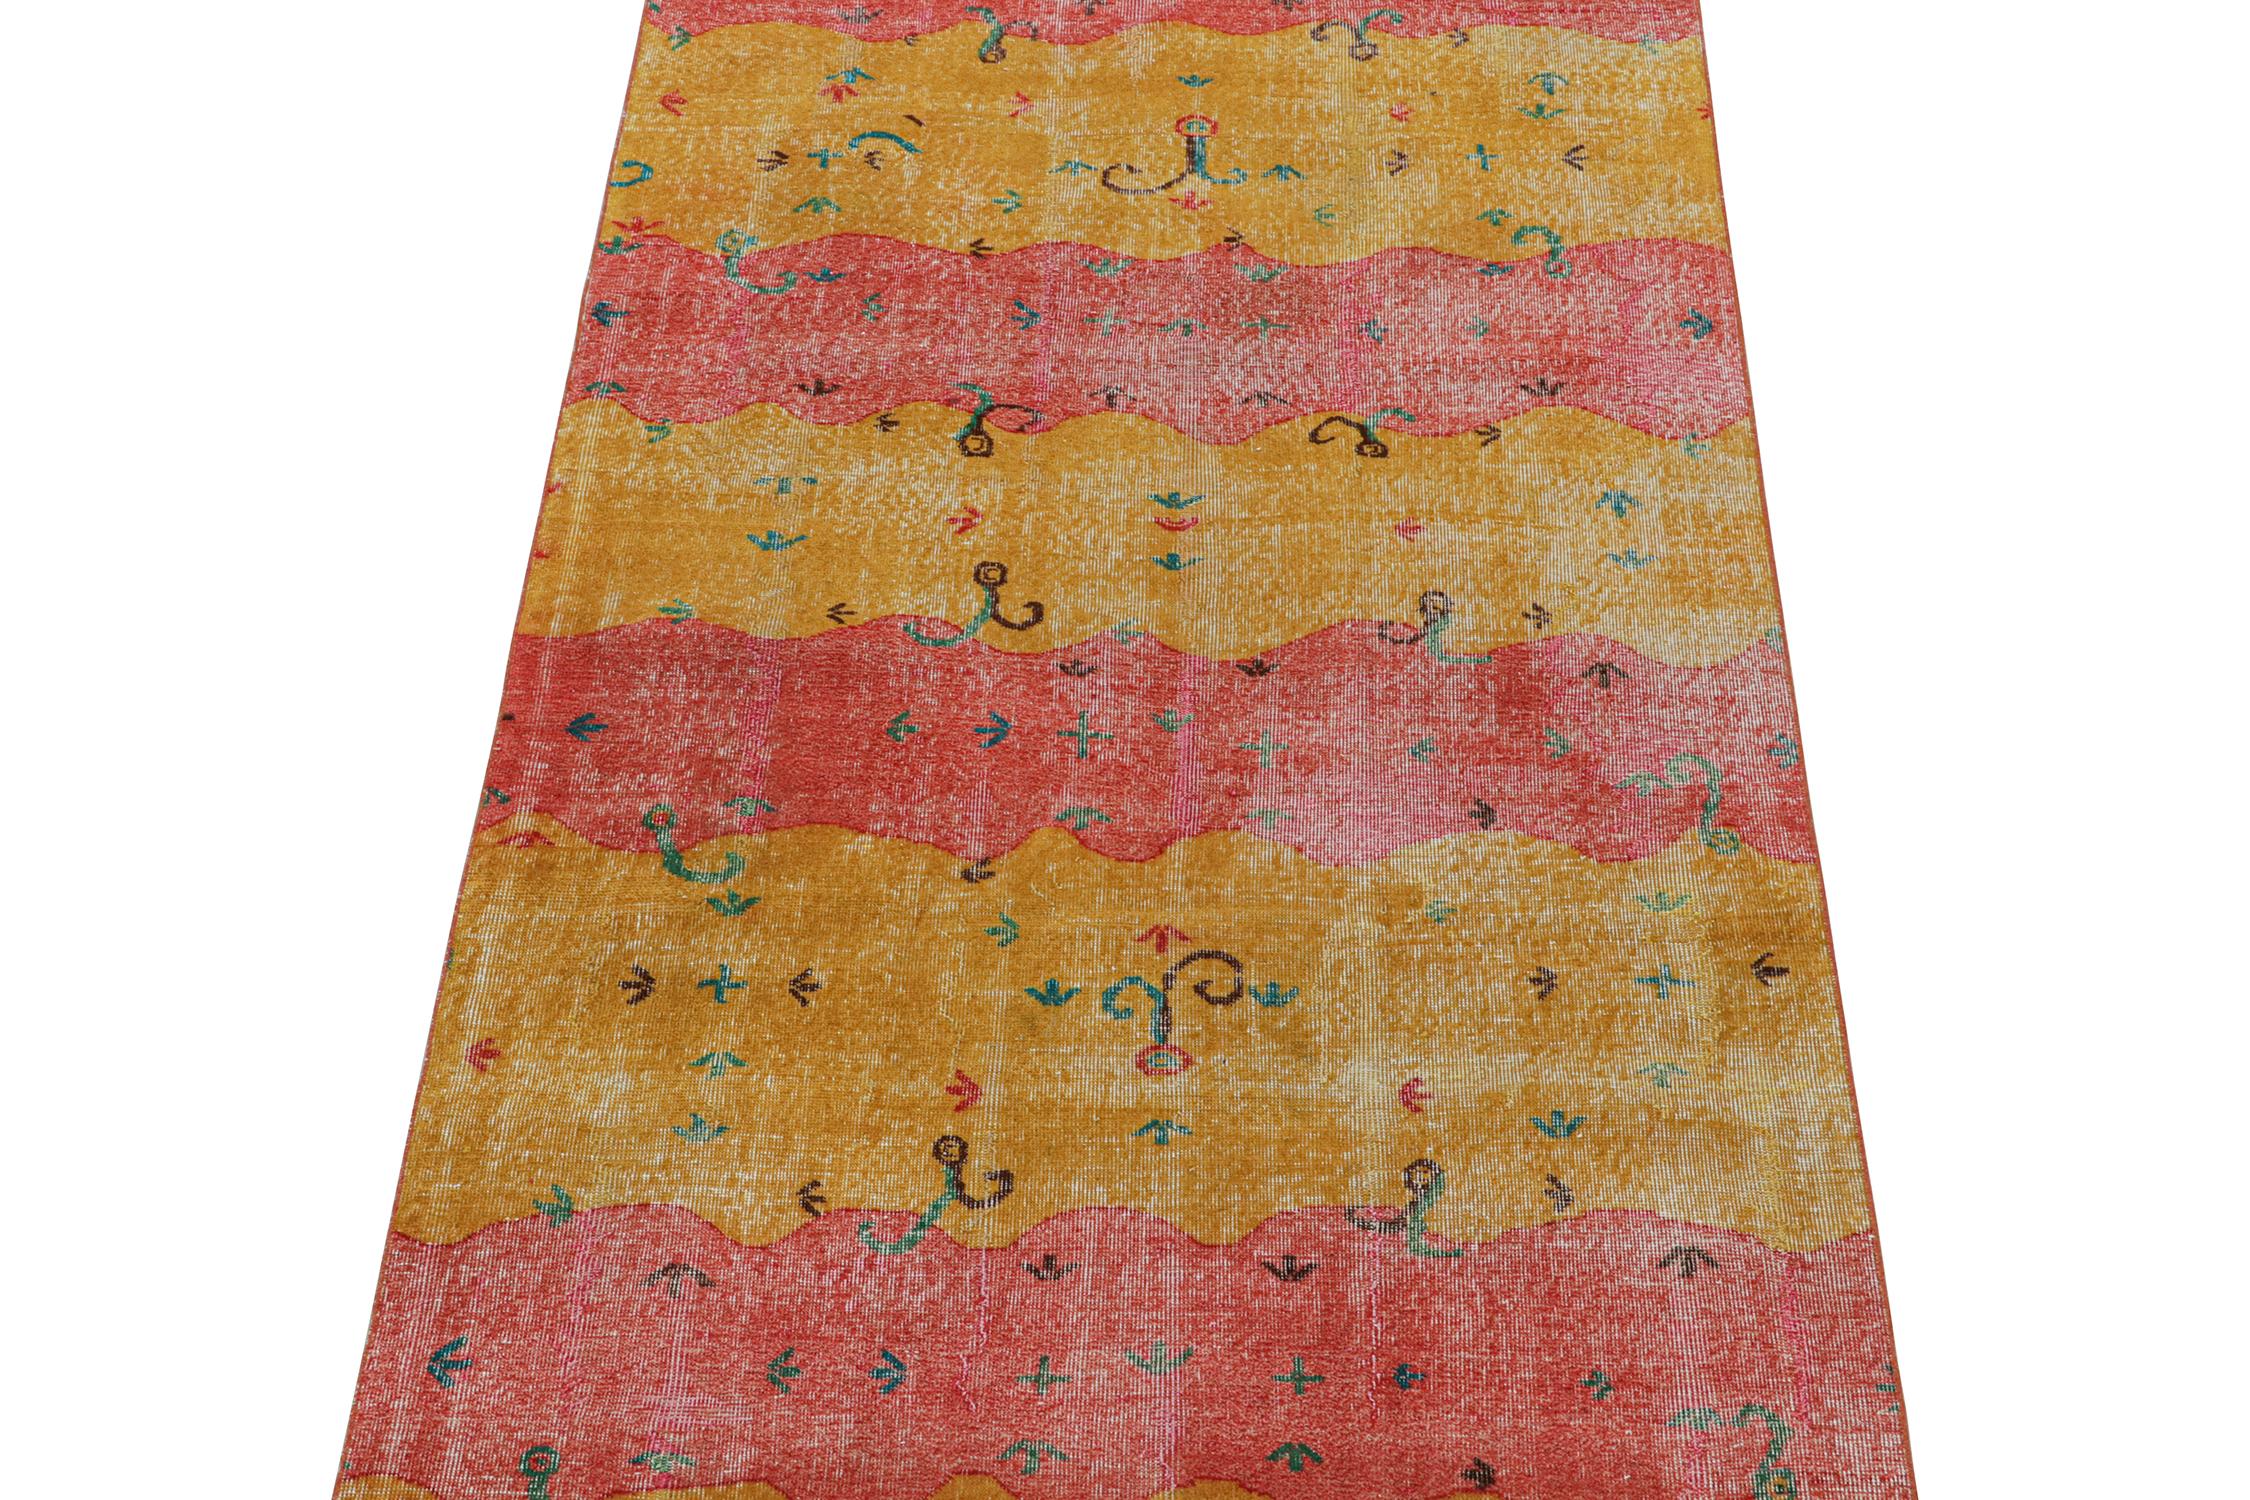 This vintage rug is an exciting new addition to Rug & Kilim’s mid-century Pasha collection. This line is a commemoration, with rare curations we believe to hail from multidisciplinary Turkish designer Zeki Müren. Measure: 5x8.
 
Hand-knotted in